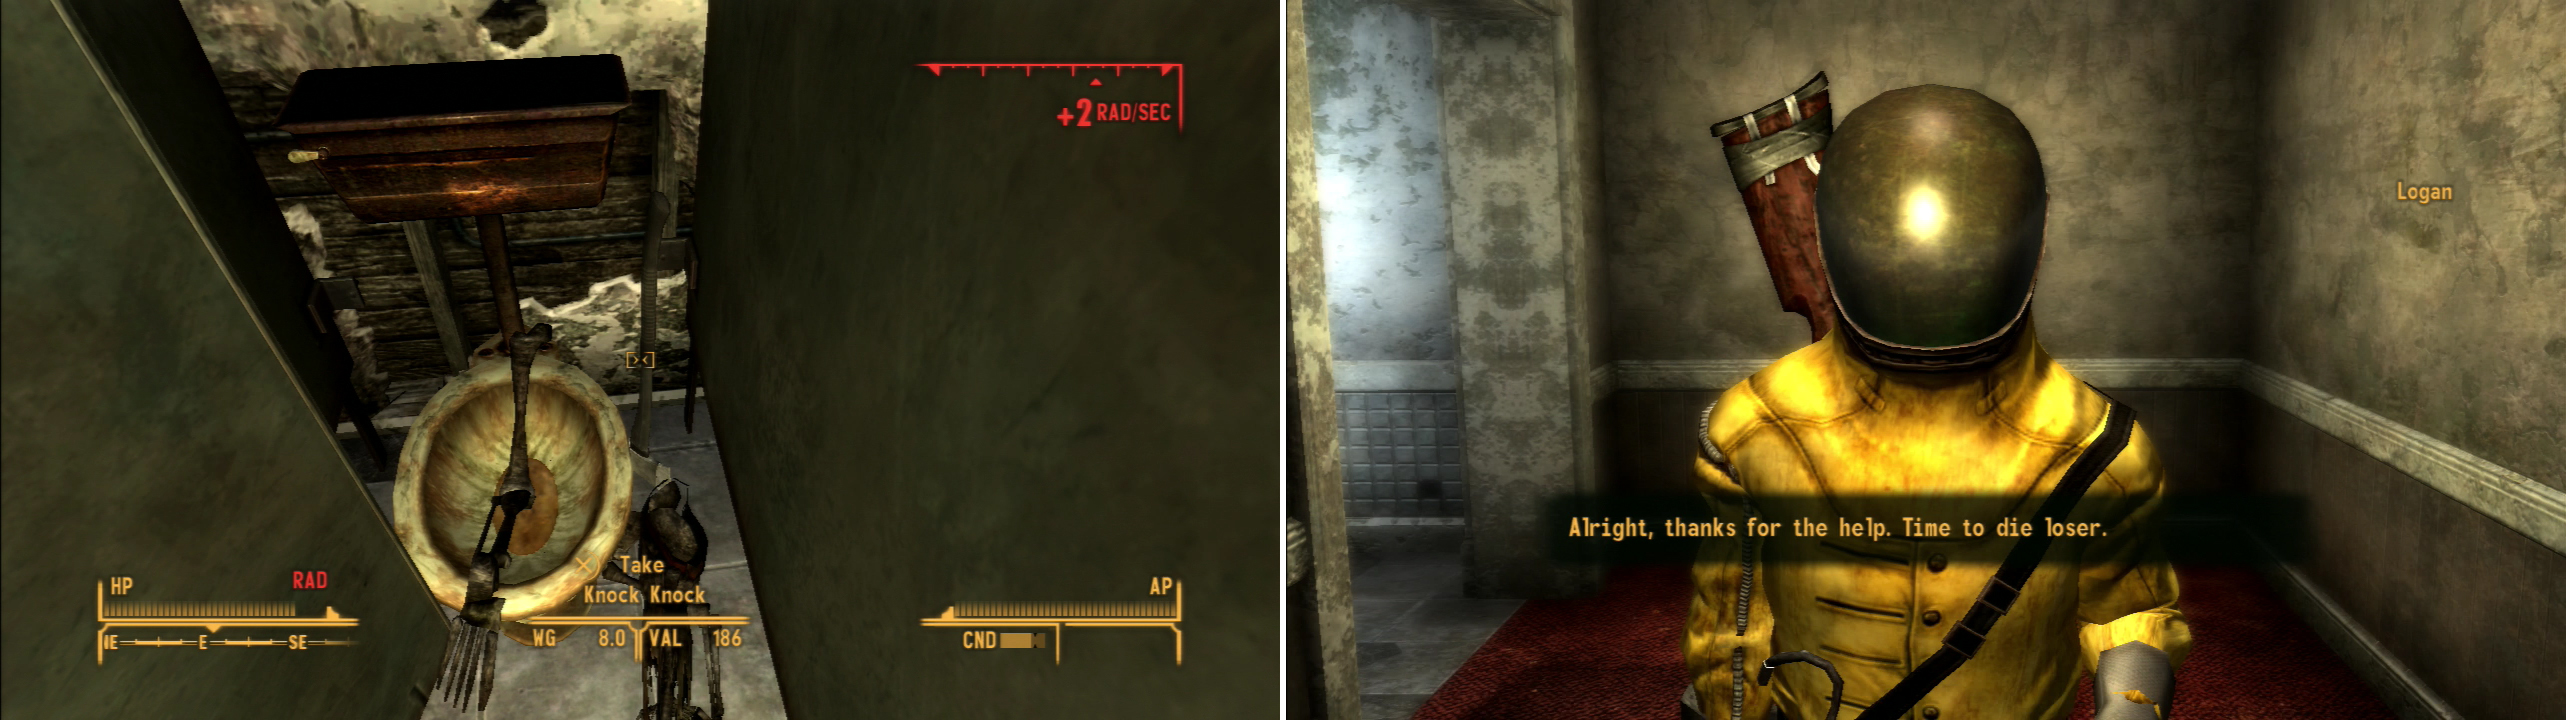 In the firehouse, you can obtain the unique weapon Knock-Knock (left). After you collect all the NCR salvage, Logan will turn on you (right).